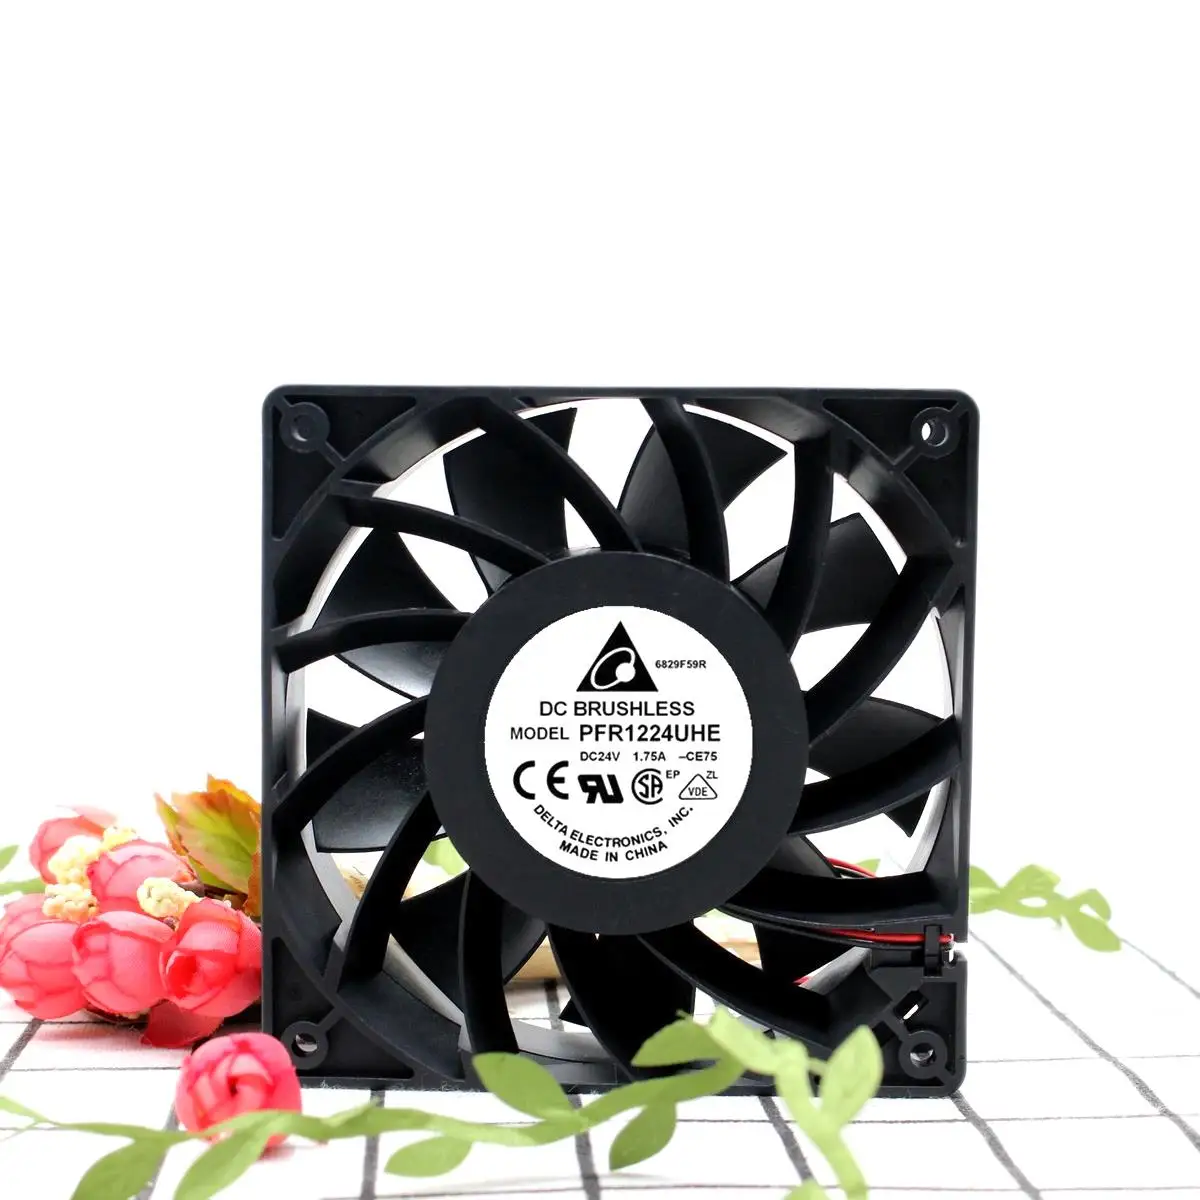 

For Delta Electronics PFR1224UHE CE75 DC 24V 1.75A 120x120x38mm 3-Wire Server Cooler Fan